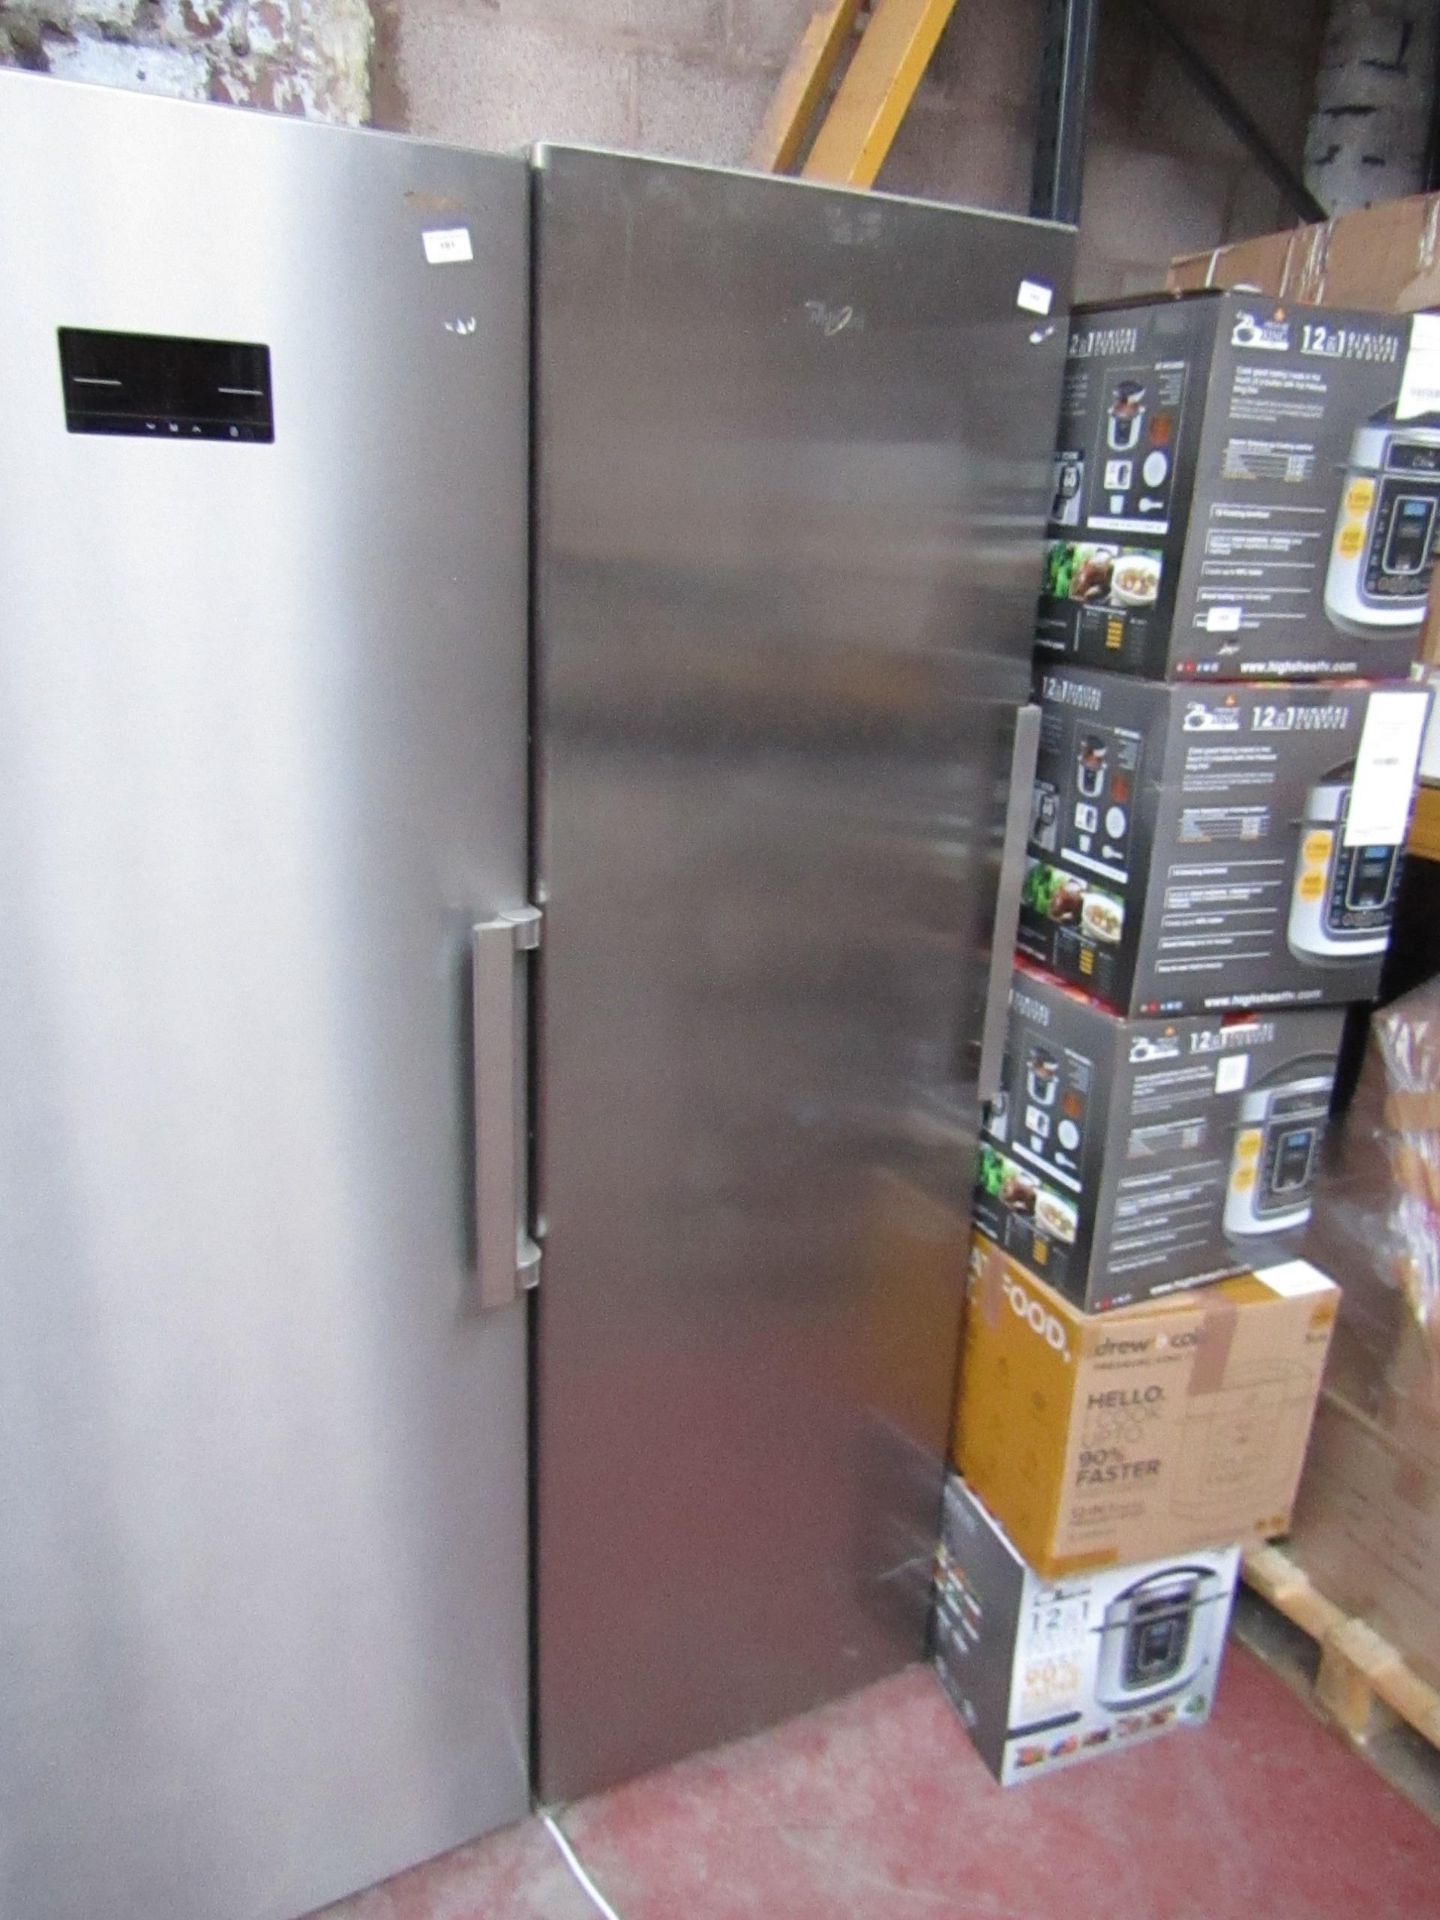 Whirlpool tall freestanding freezer, tested working for coldness but heavily used inside.